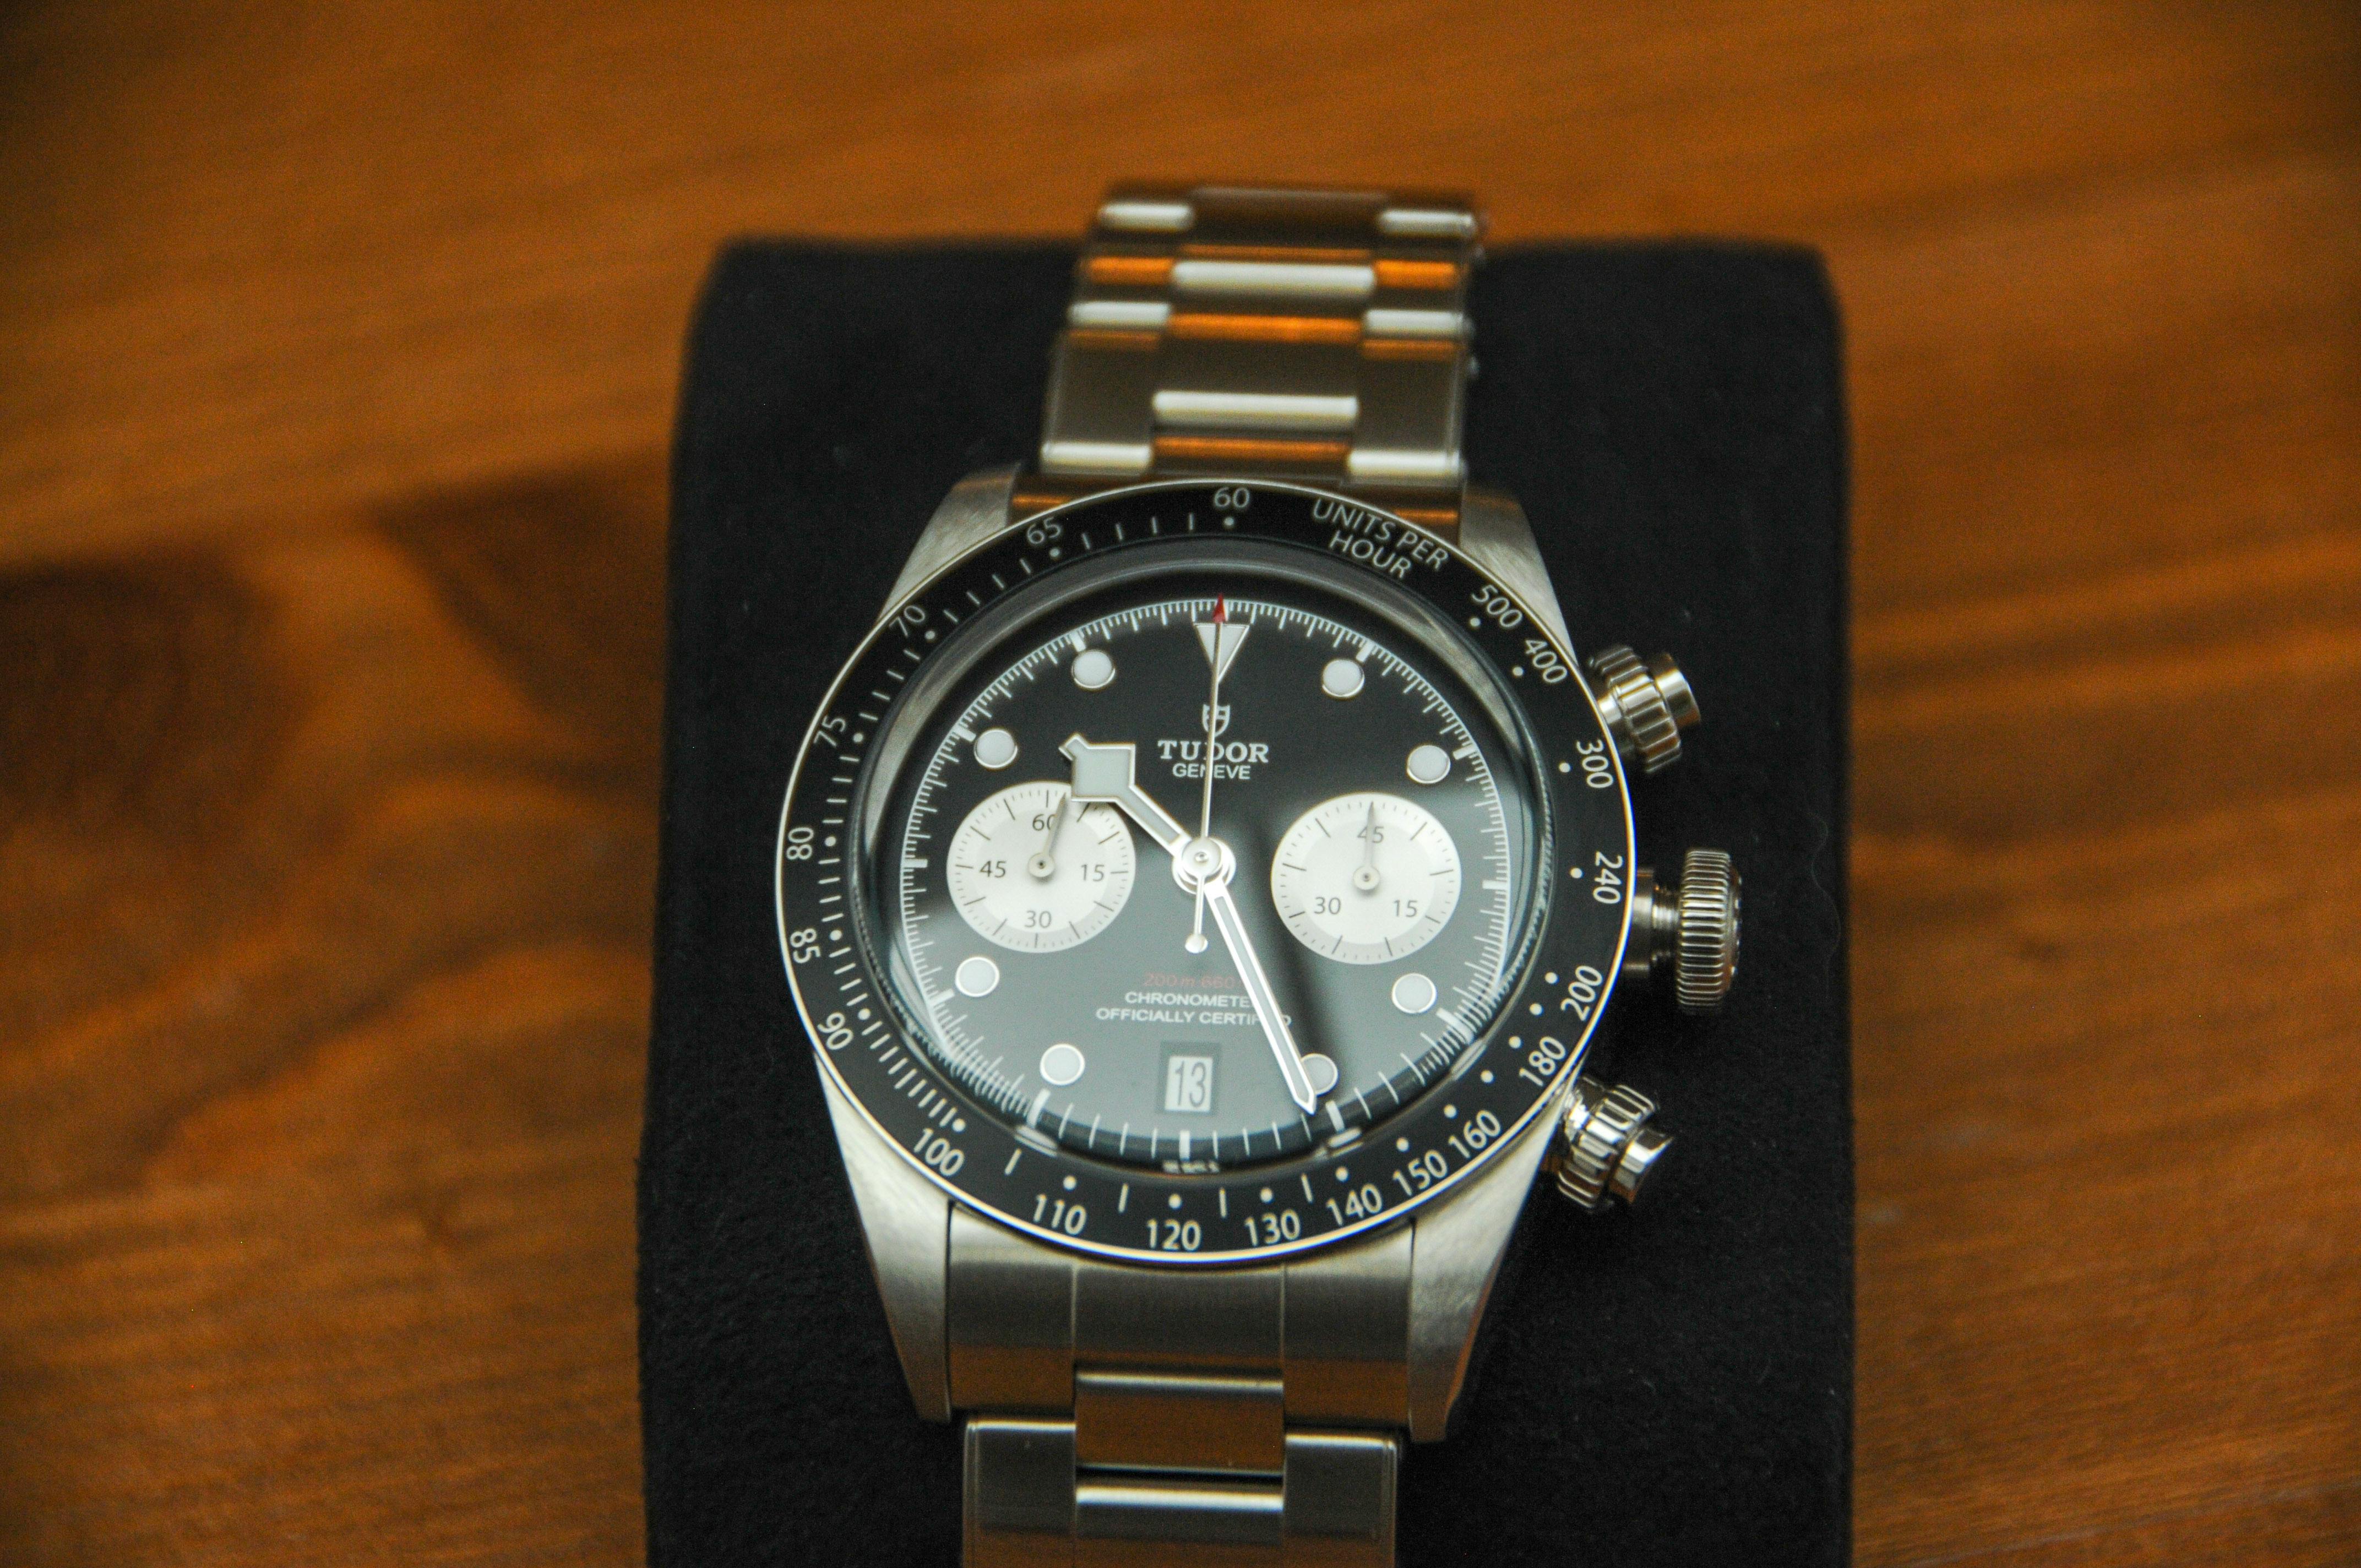 2022 TUDOR BLACK BAY CHRONOGRAPH for sale by auction in North Berwick ...